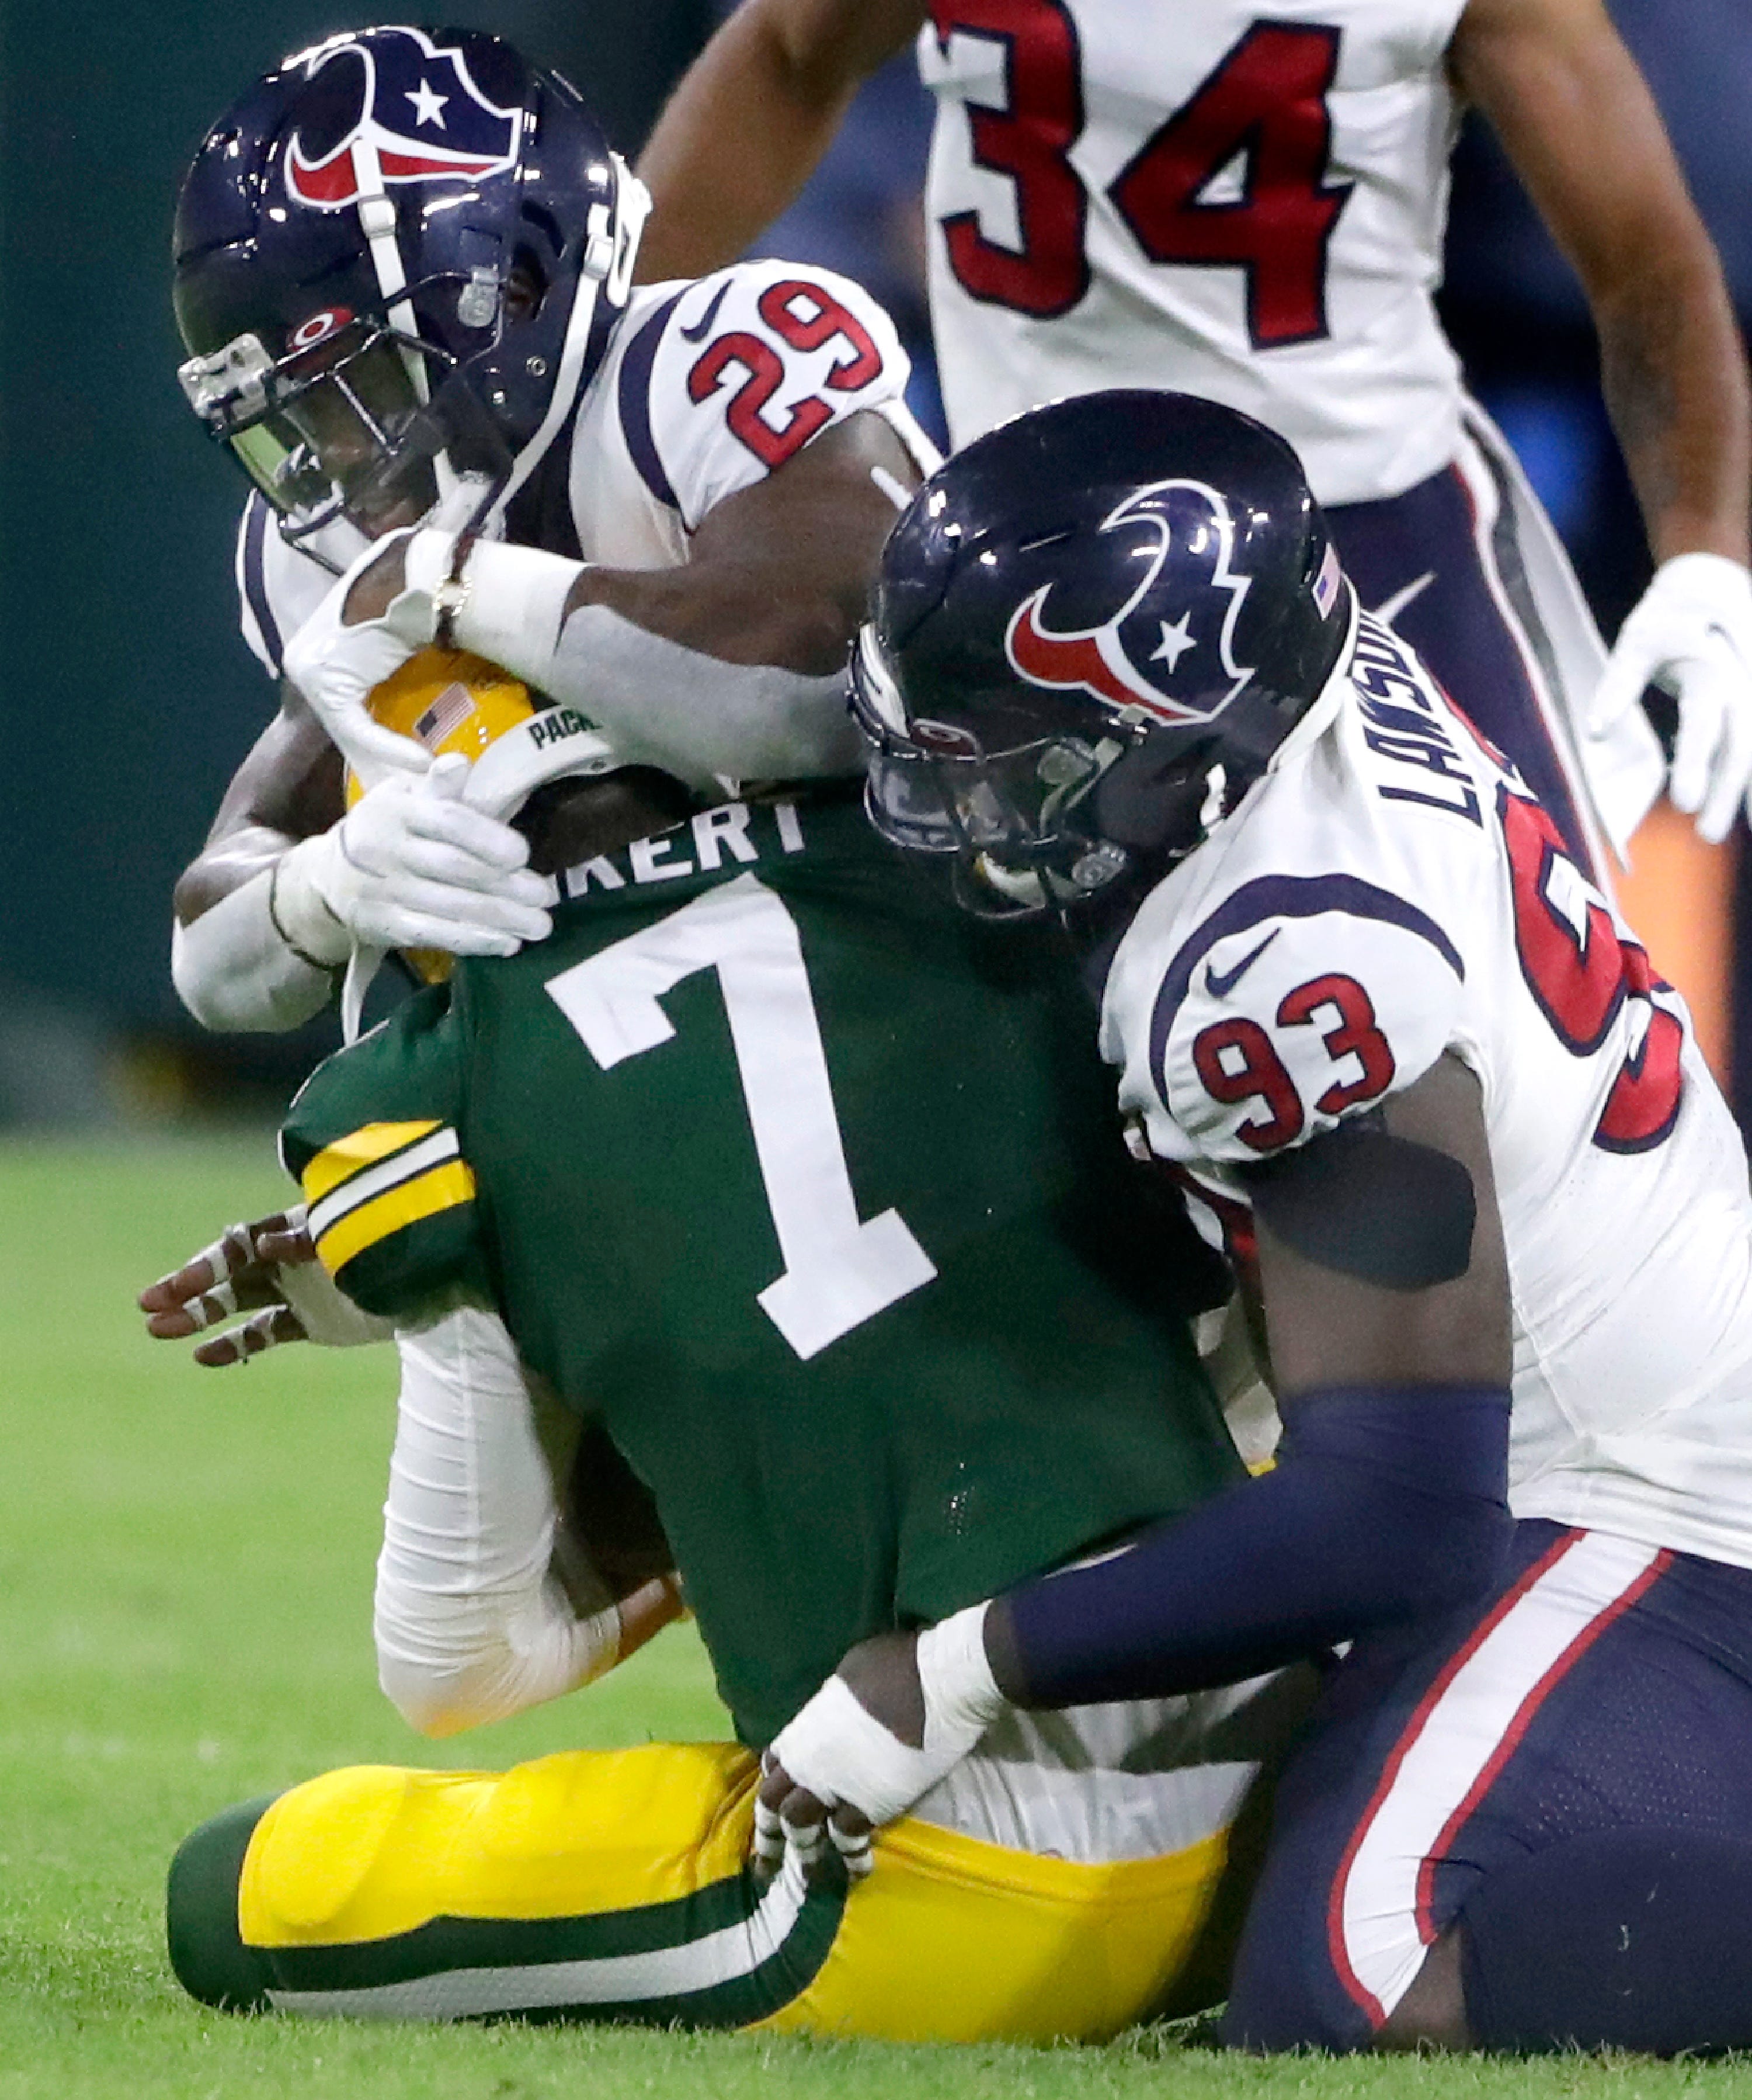 Green Bay Packers quarterback Kurt Benkert (7) is sacked by Houston Texans safety Terrence Brooks and defensive end Shaq Lawson during their preseason football game at Lambeau Field in Green Bay.